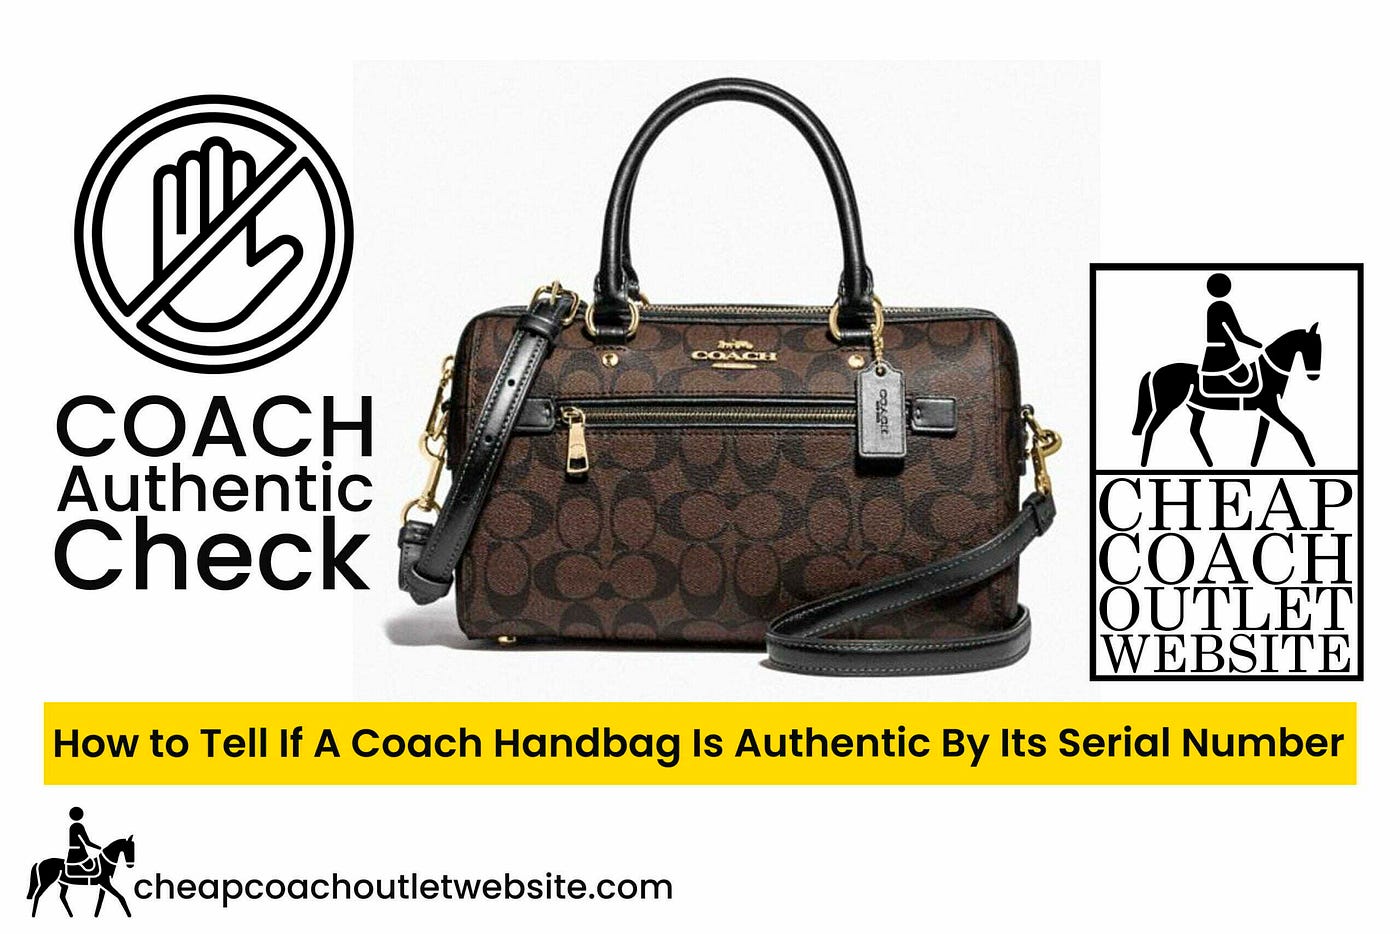 How to Authenticate Your Coach Bag